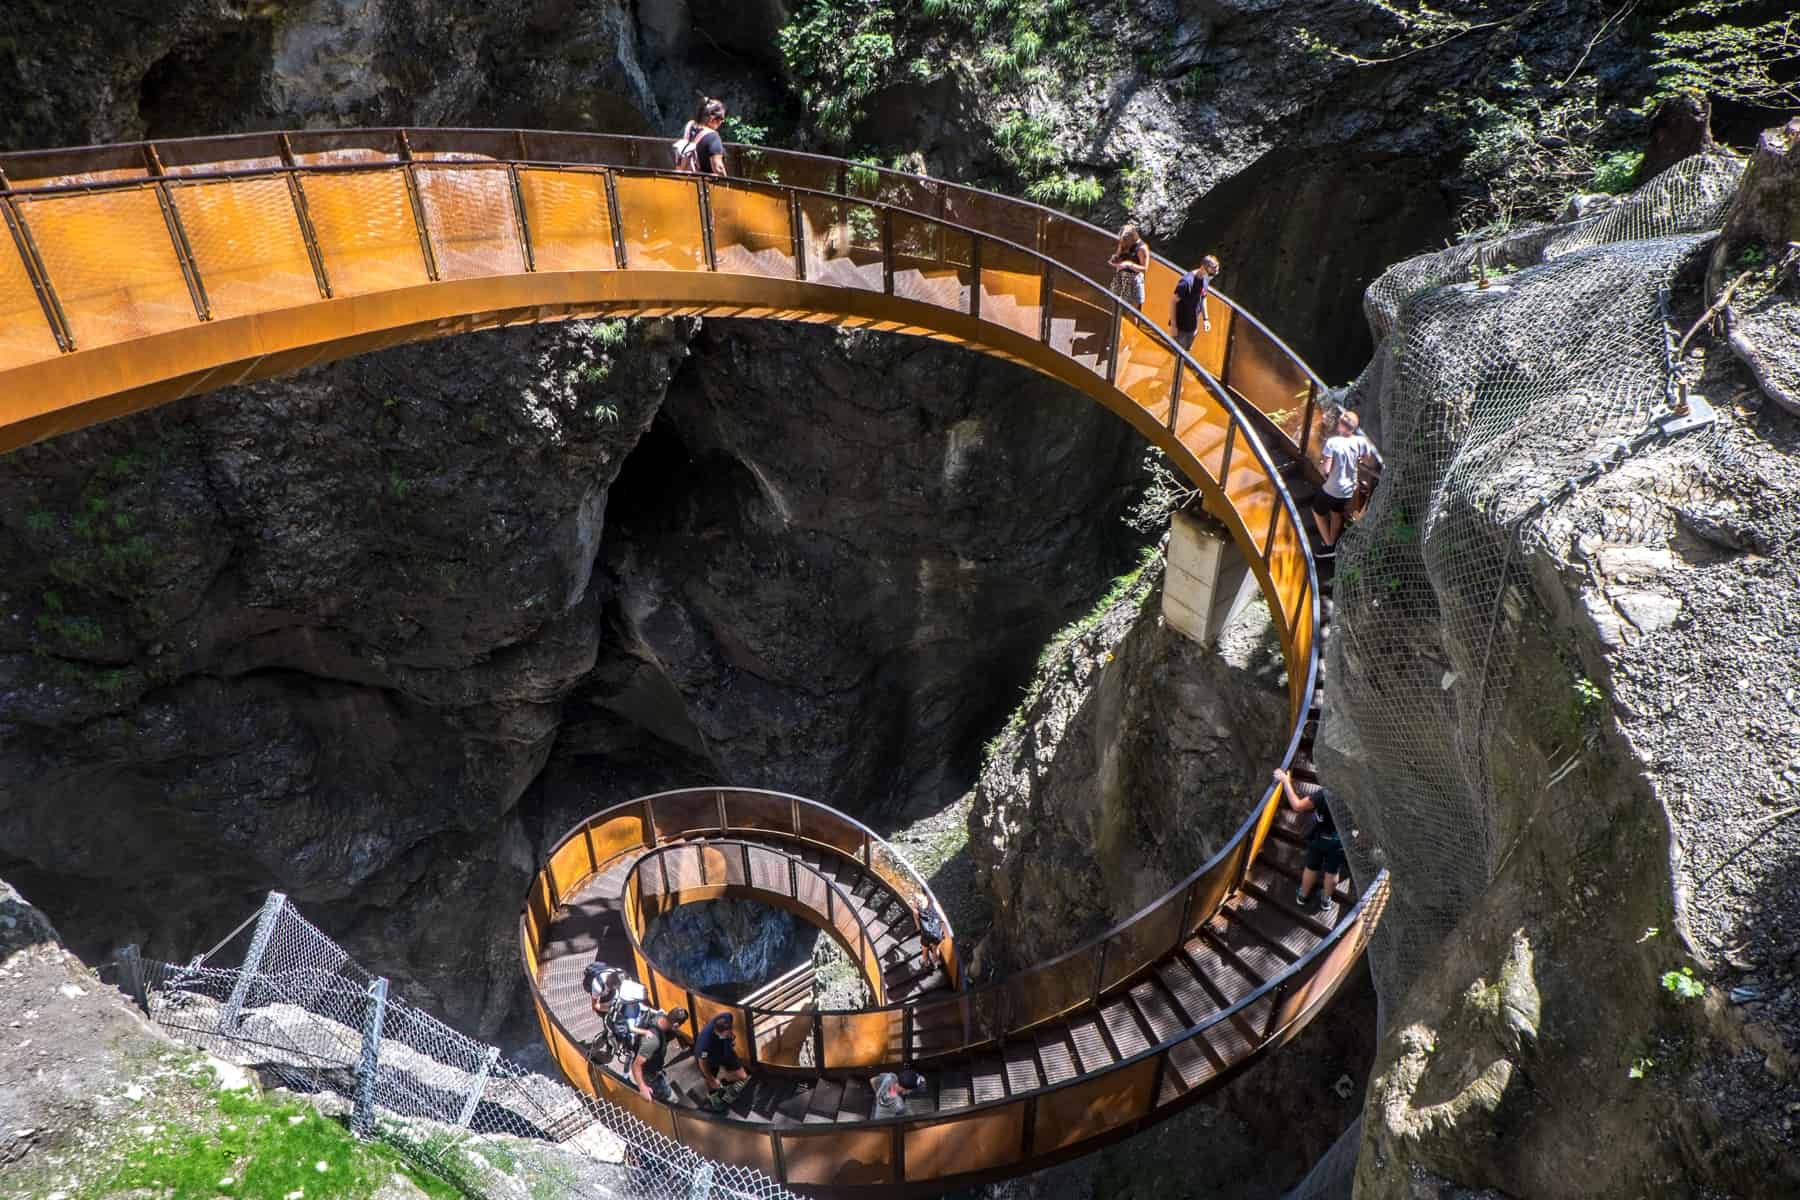 People walking down the copper coloured winding 'helix' staircase in the natural gorge called Liechtensteinklamm in Austria